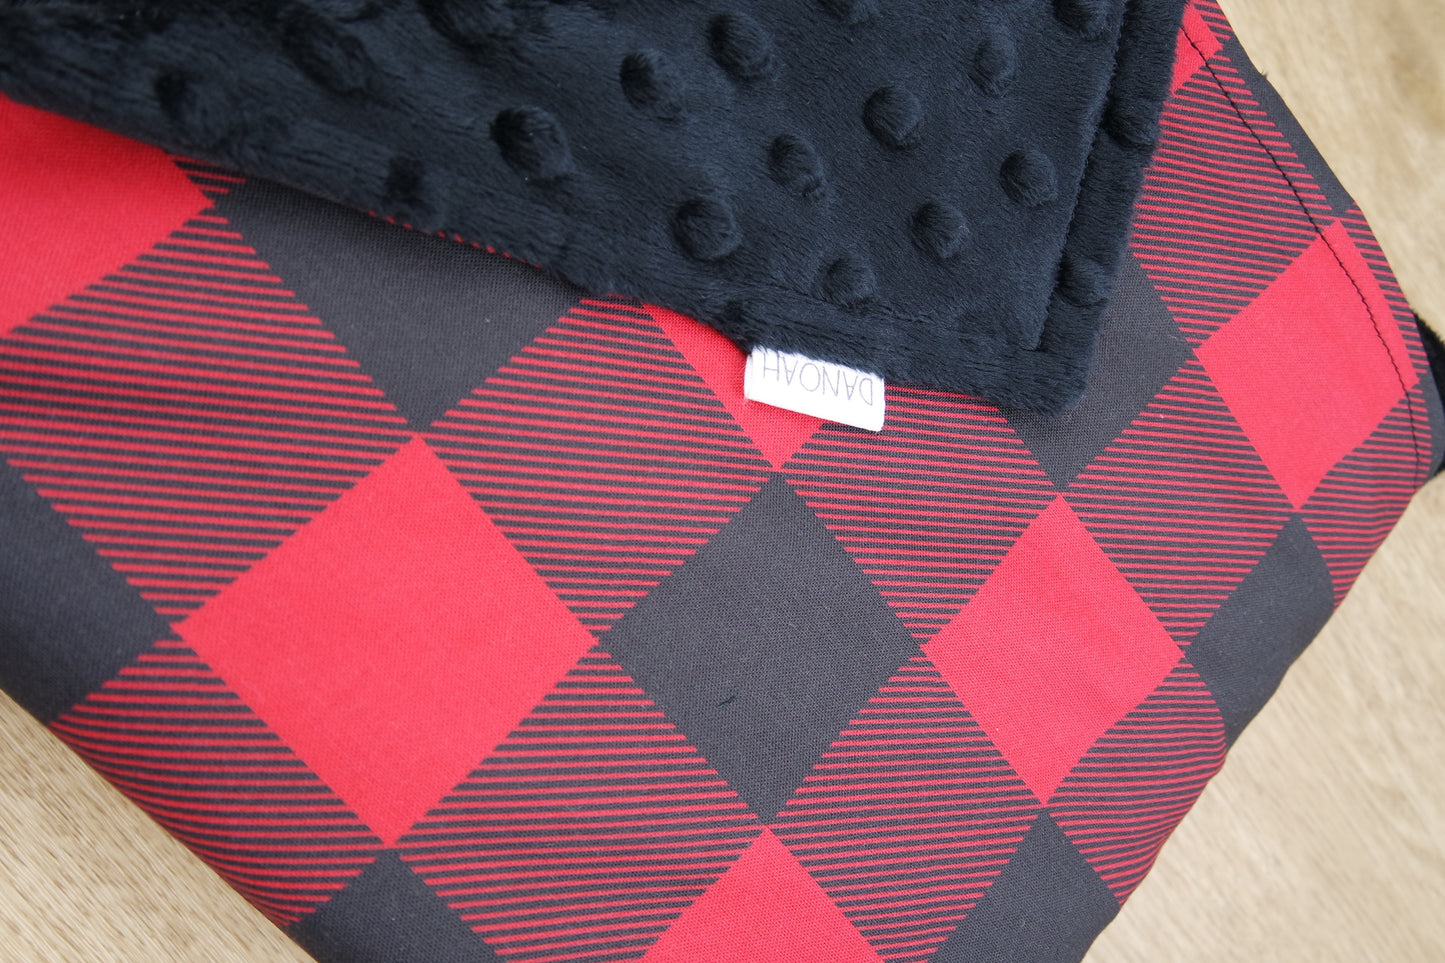 Red Plaid Minky Baby Blanket